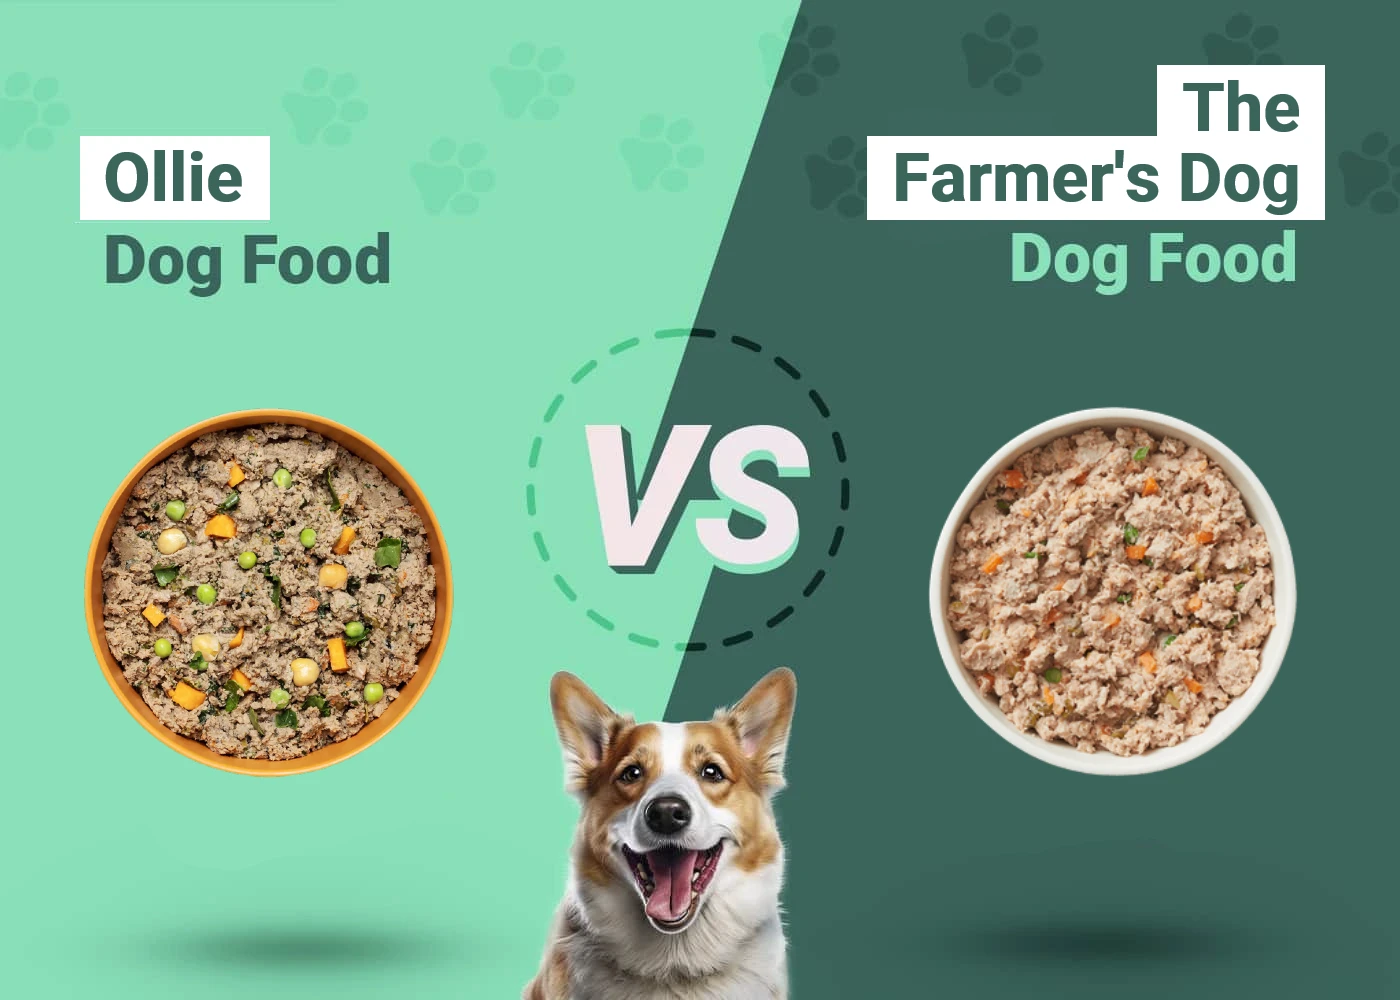 Ollie vs The Farmer's Dog Dog Food - Featured Image